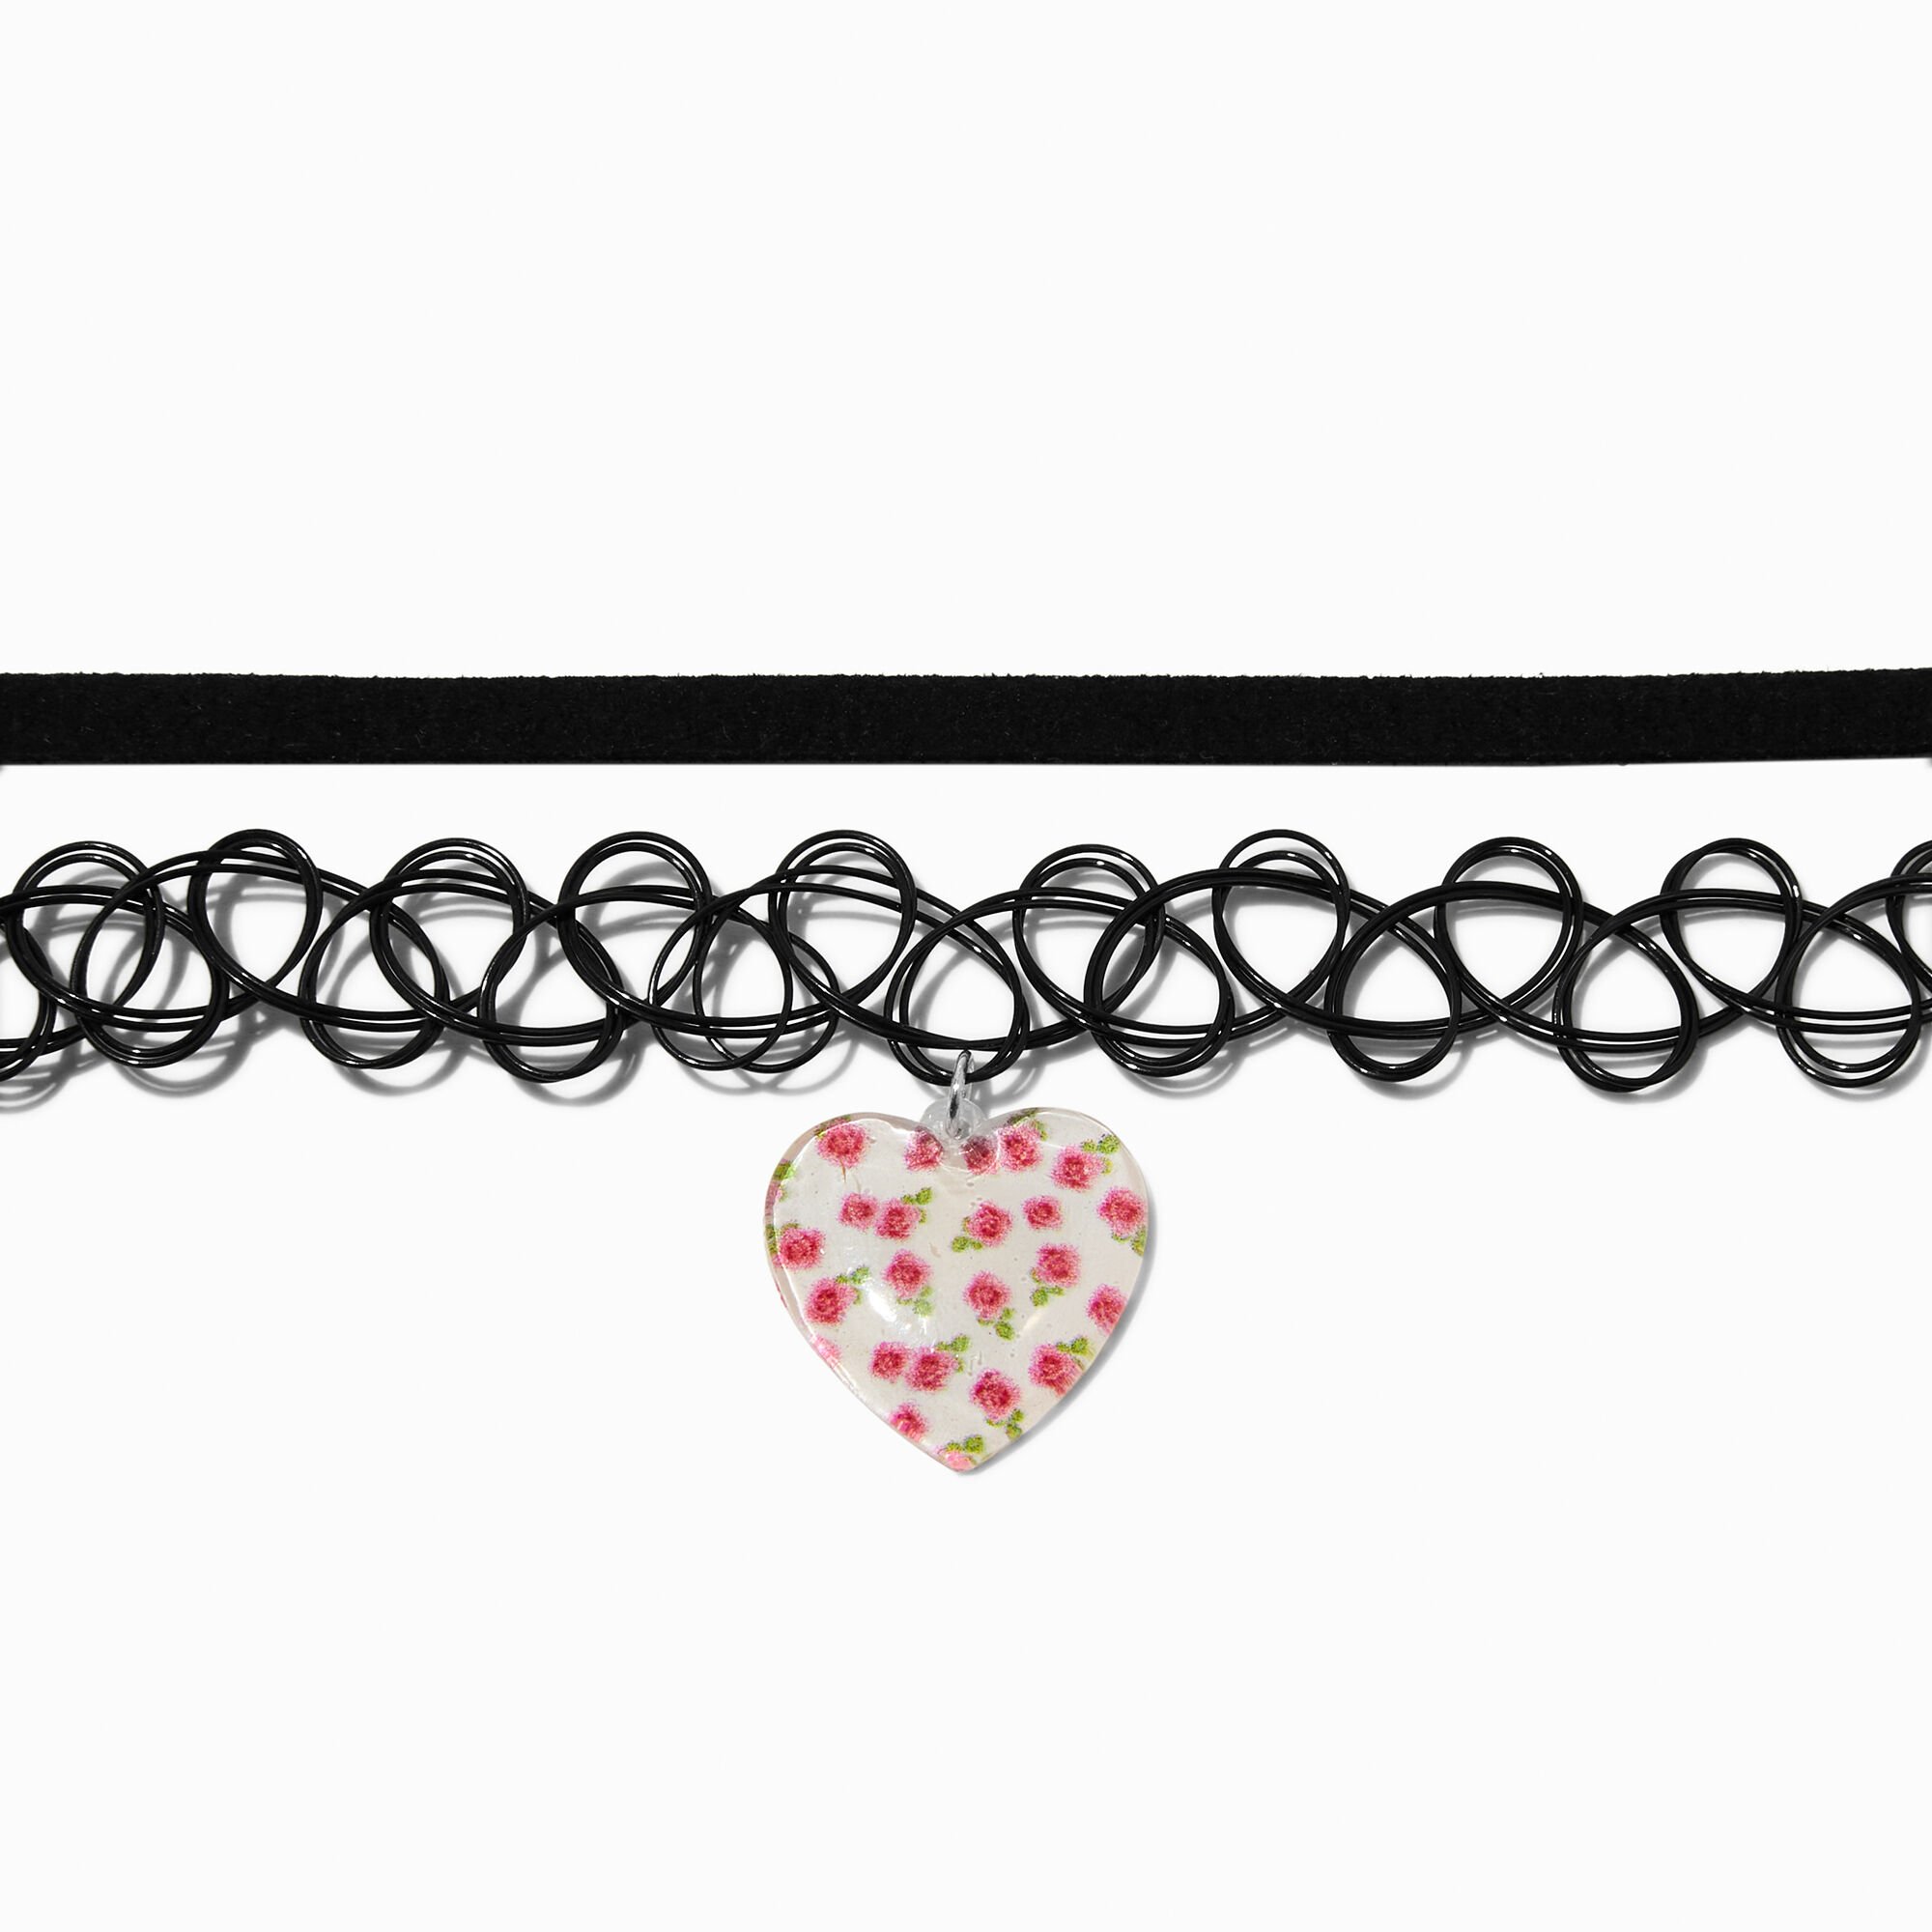 View Claires Ribbon Tattoo Heart Choker Necklaces 2 Pack Black information